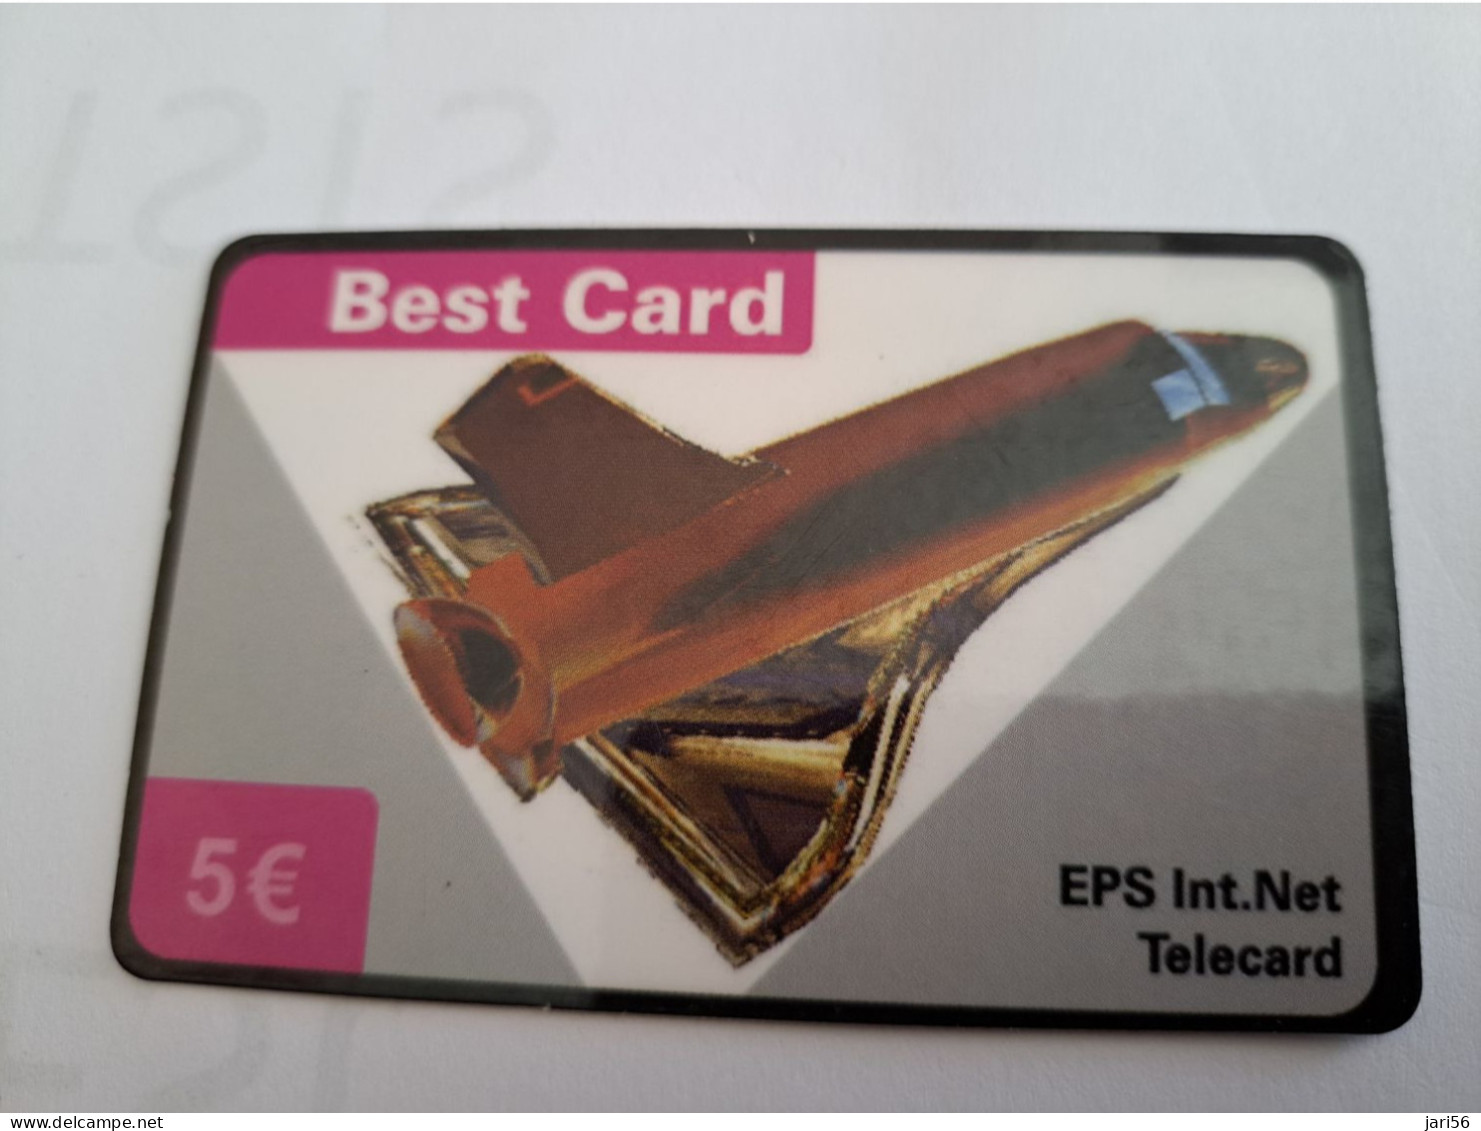 DUITSLAND/GERMANY  € 5,- / BEST CARD/ SPACE SHUTTLE   ON CARD        Fine Used  PREPAID  **16533** - [2] Mobile Phones, Refills And Prepaid Cards